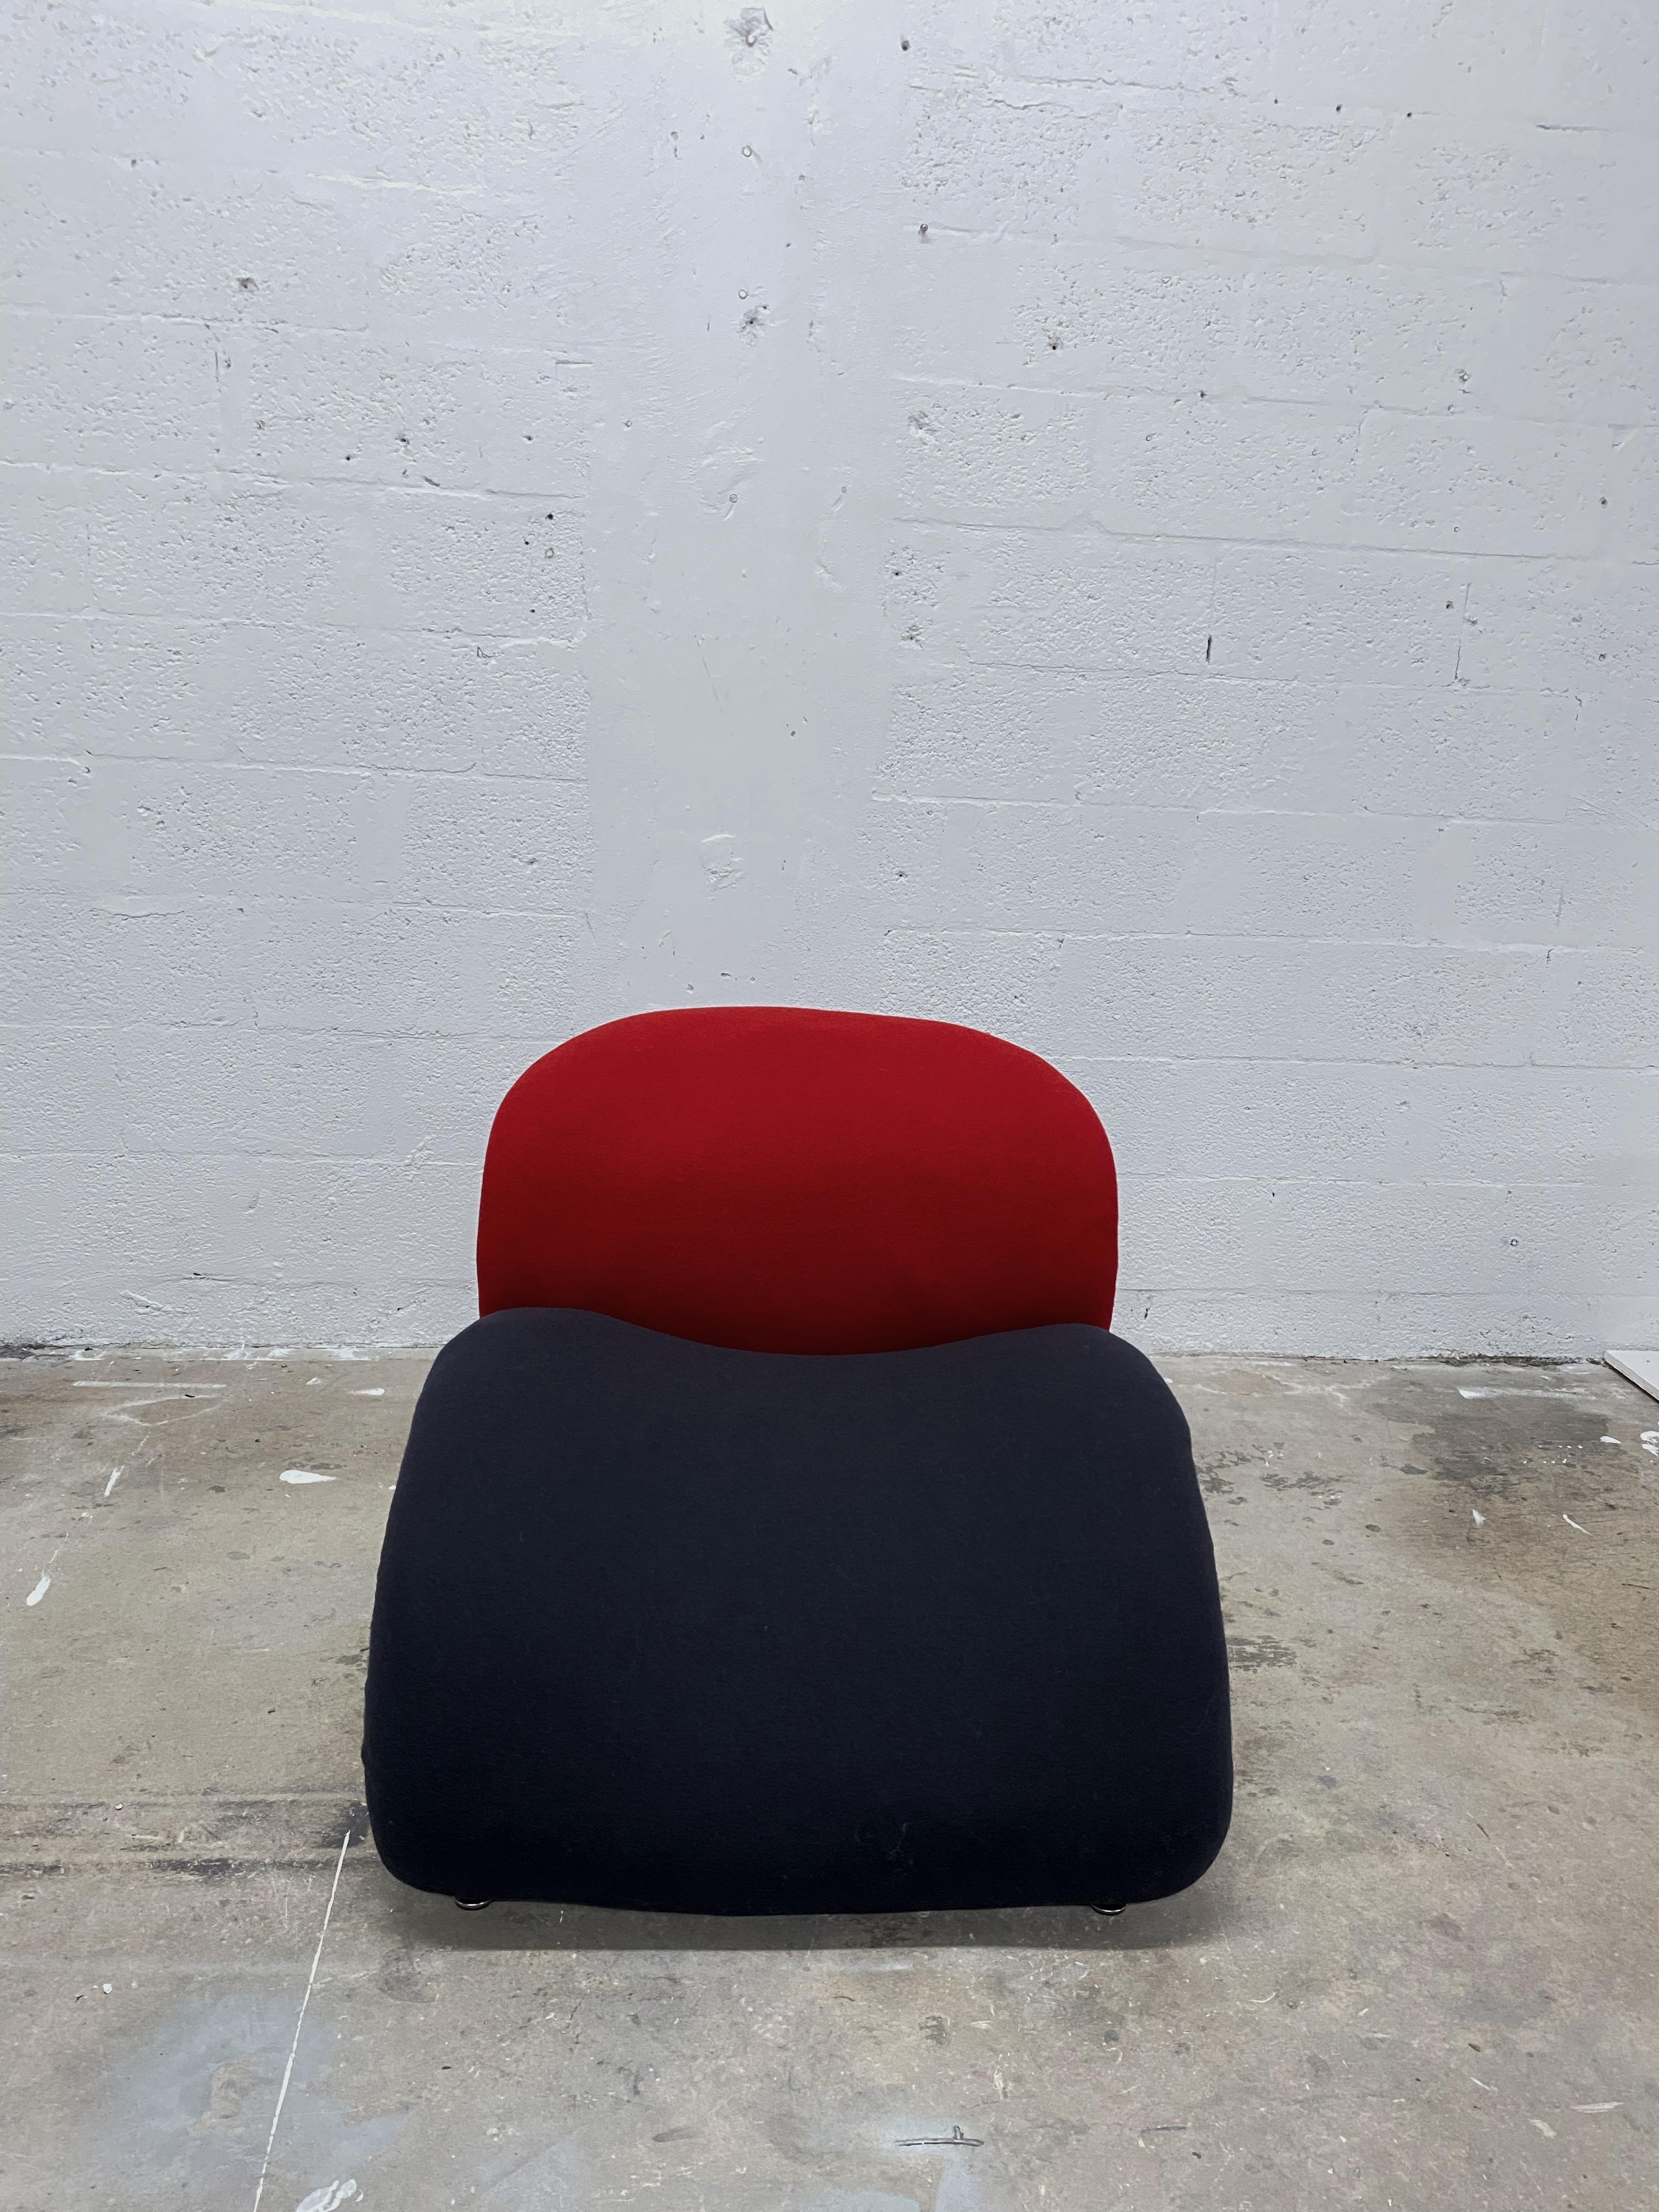 Original Pierre Paulin Le Chat lounge chair manufactured by Artifort. The lounge chair has been restored and newly upholstered in Nina Koppel for Artifort Tonus 4 Fabric; black (# 0690) for the seat and red (# 1030) for the back. Extremely